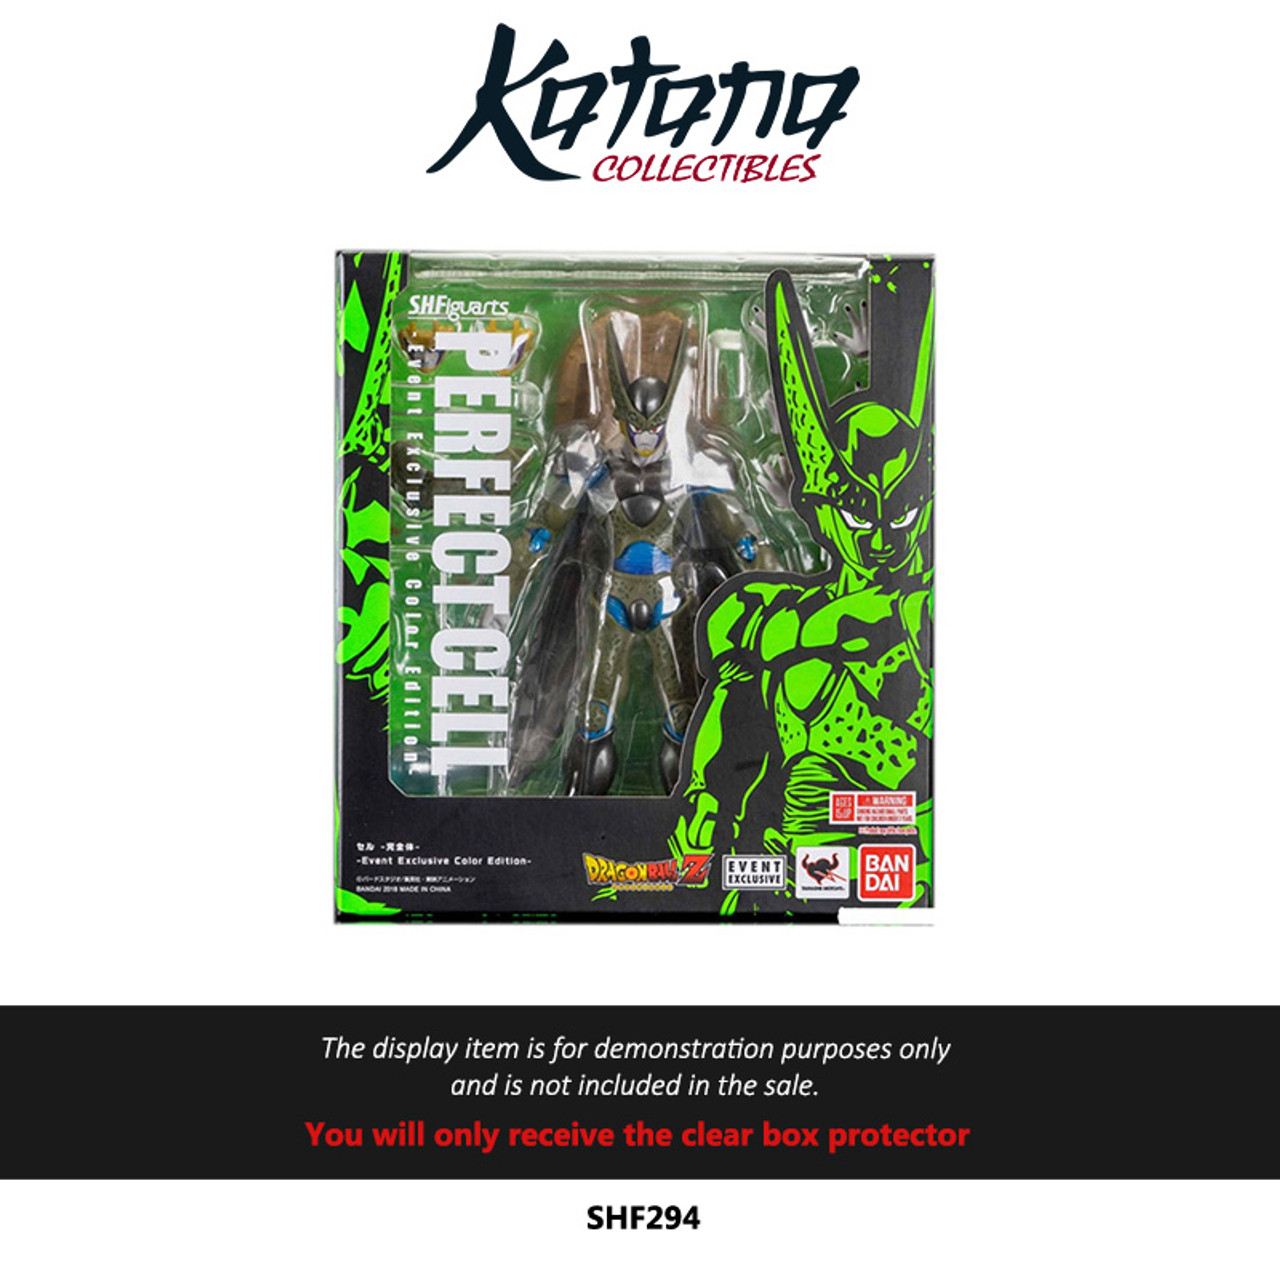 Katana Collectibles Protector For S.H.Figuarts Dragon Ball Z Cell SDCC Event Exclusive Color Edition